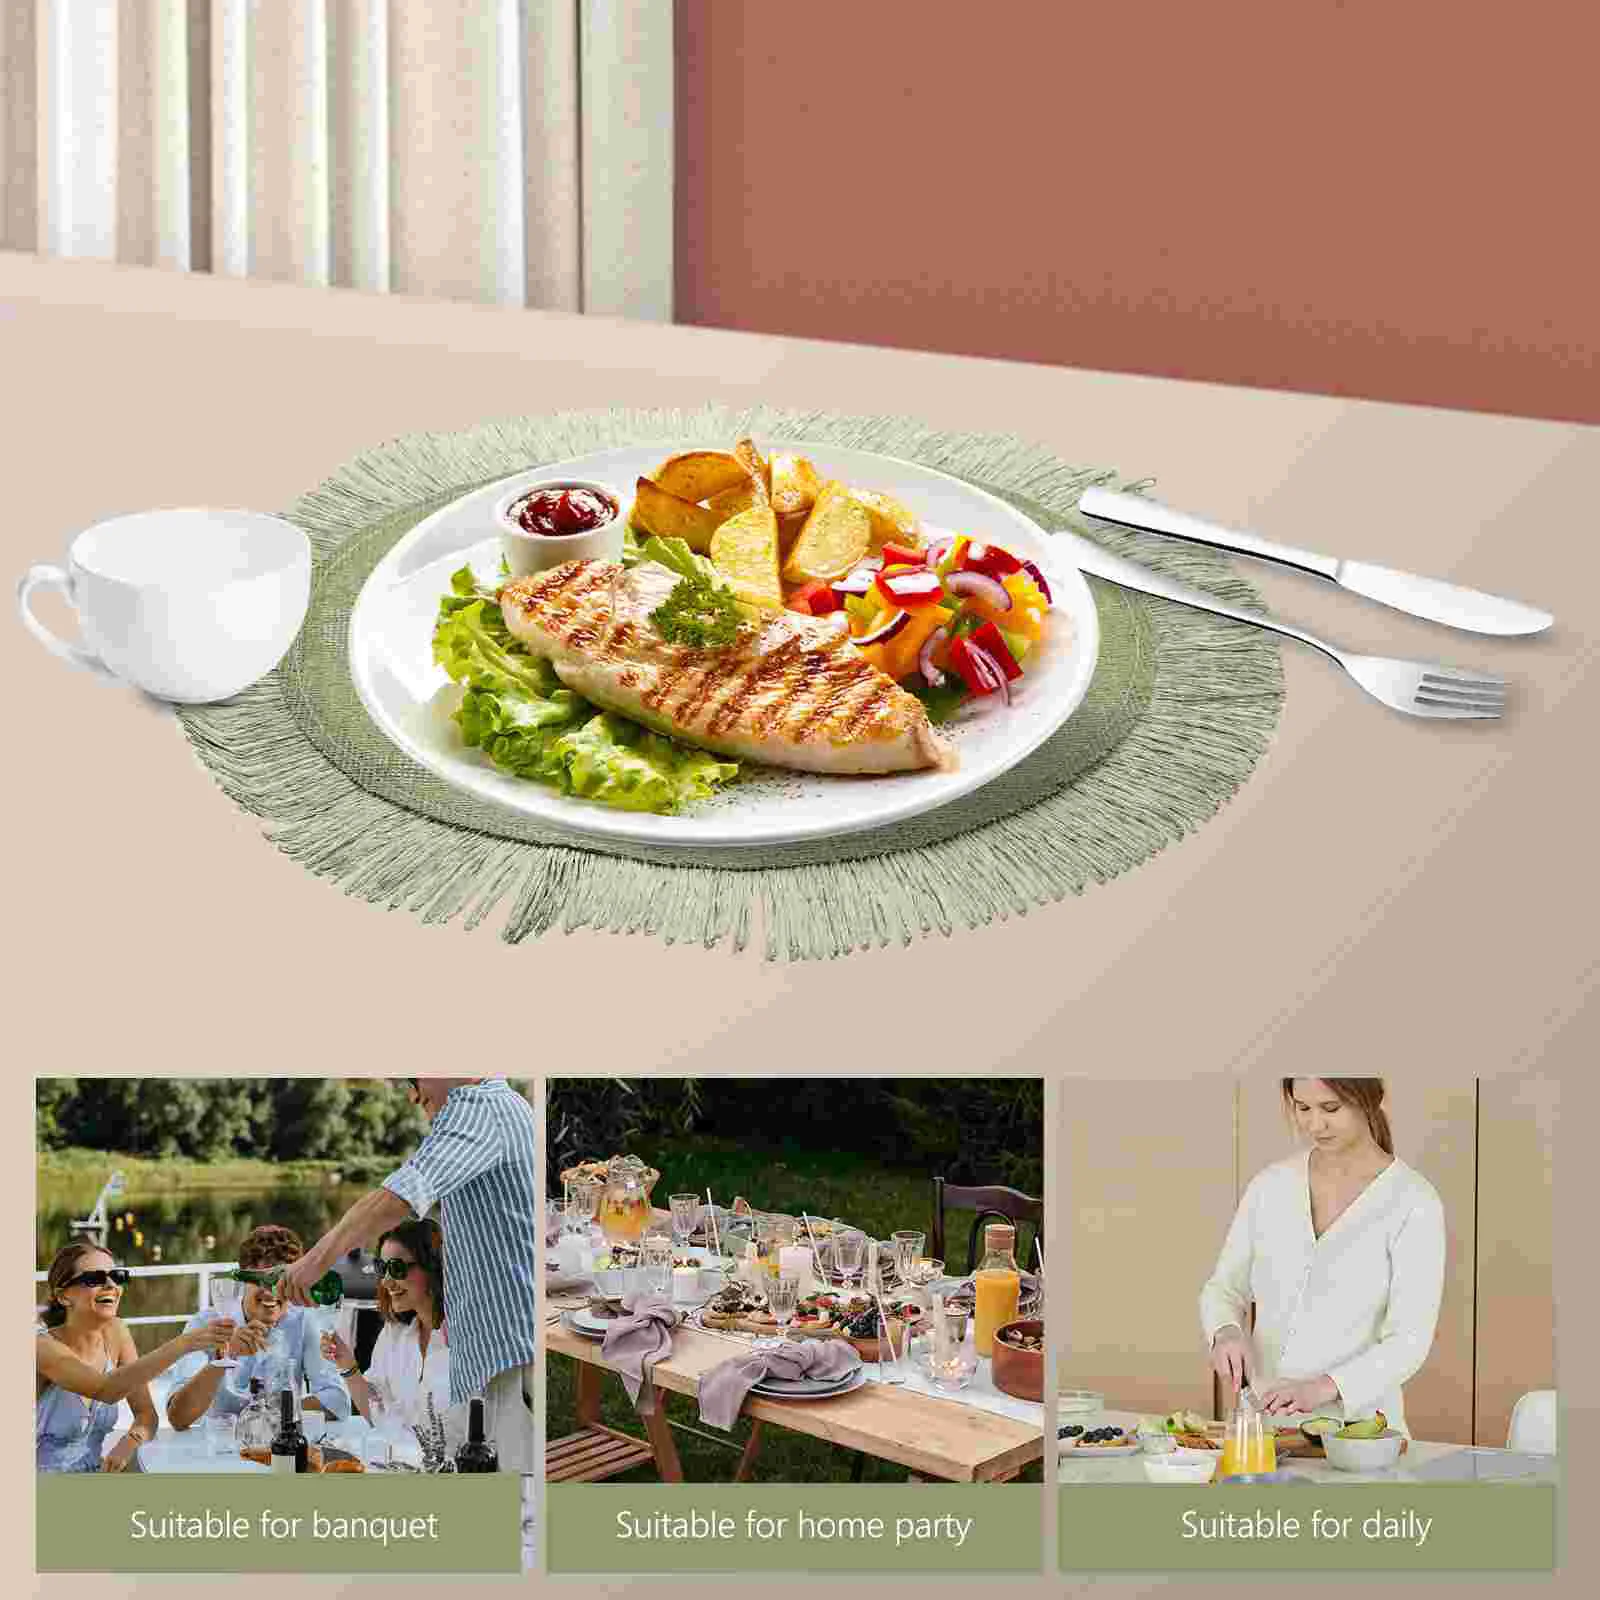 

Coaster Table Drink Dining Mat Placemats Mats Round Heat Resistant Coffee Pad Cutlery Cup Coasters Placemat Mug Beverage Woven